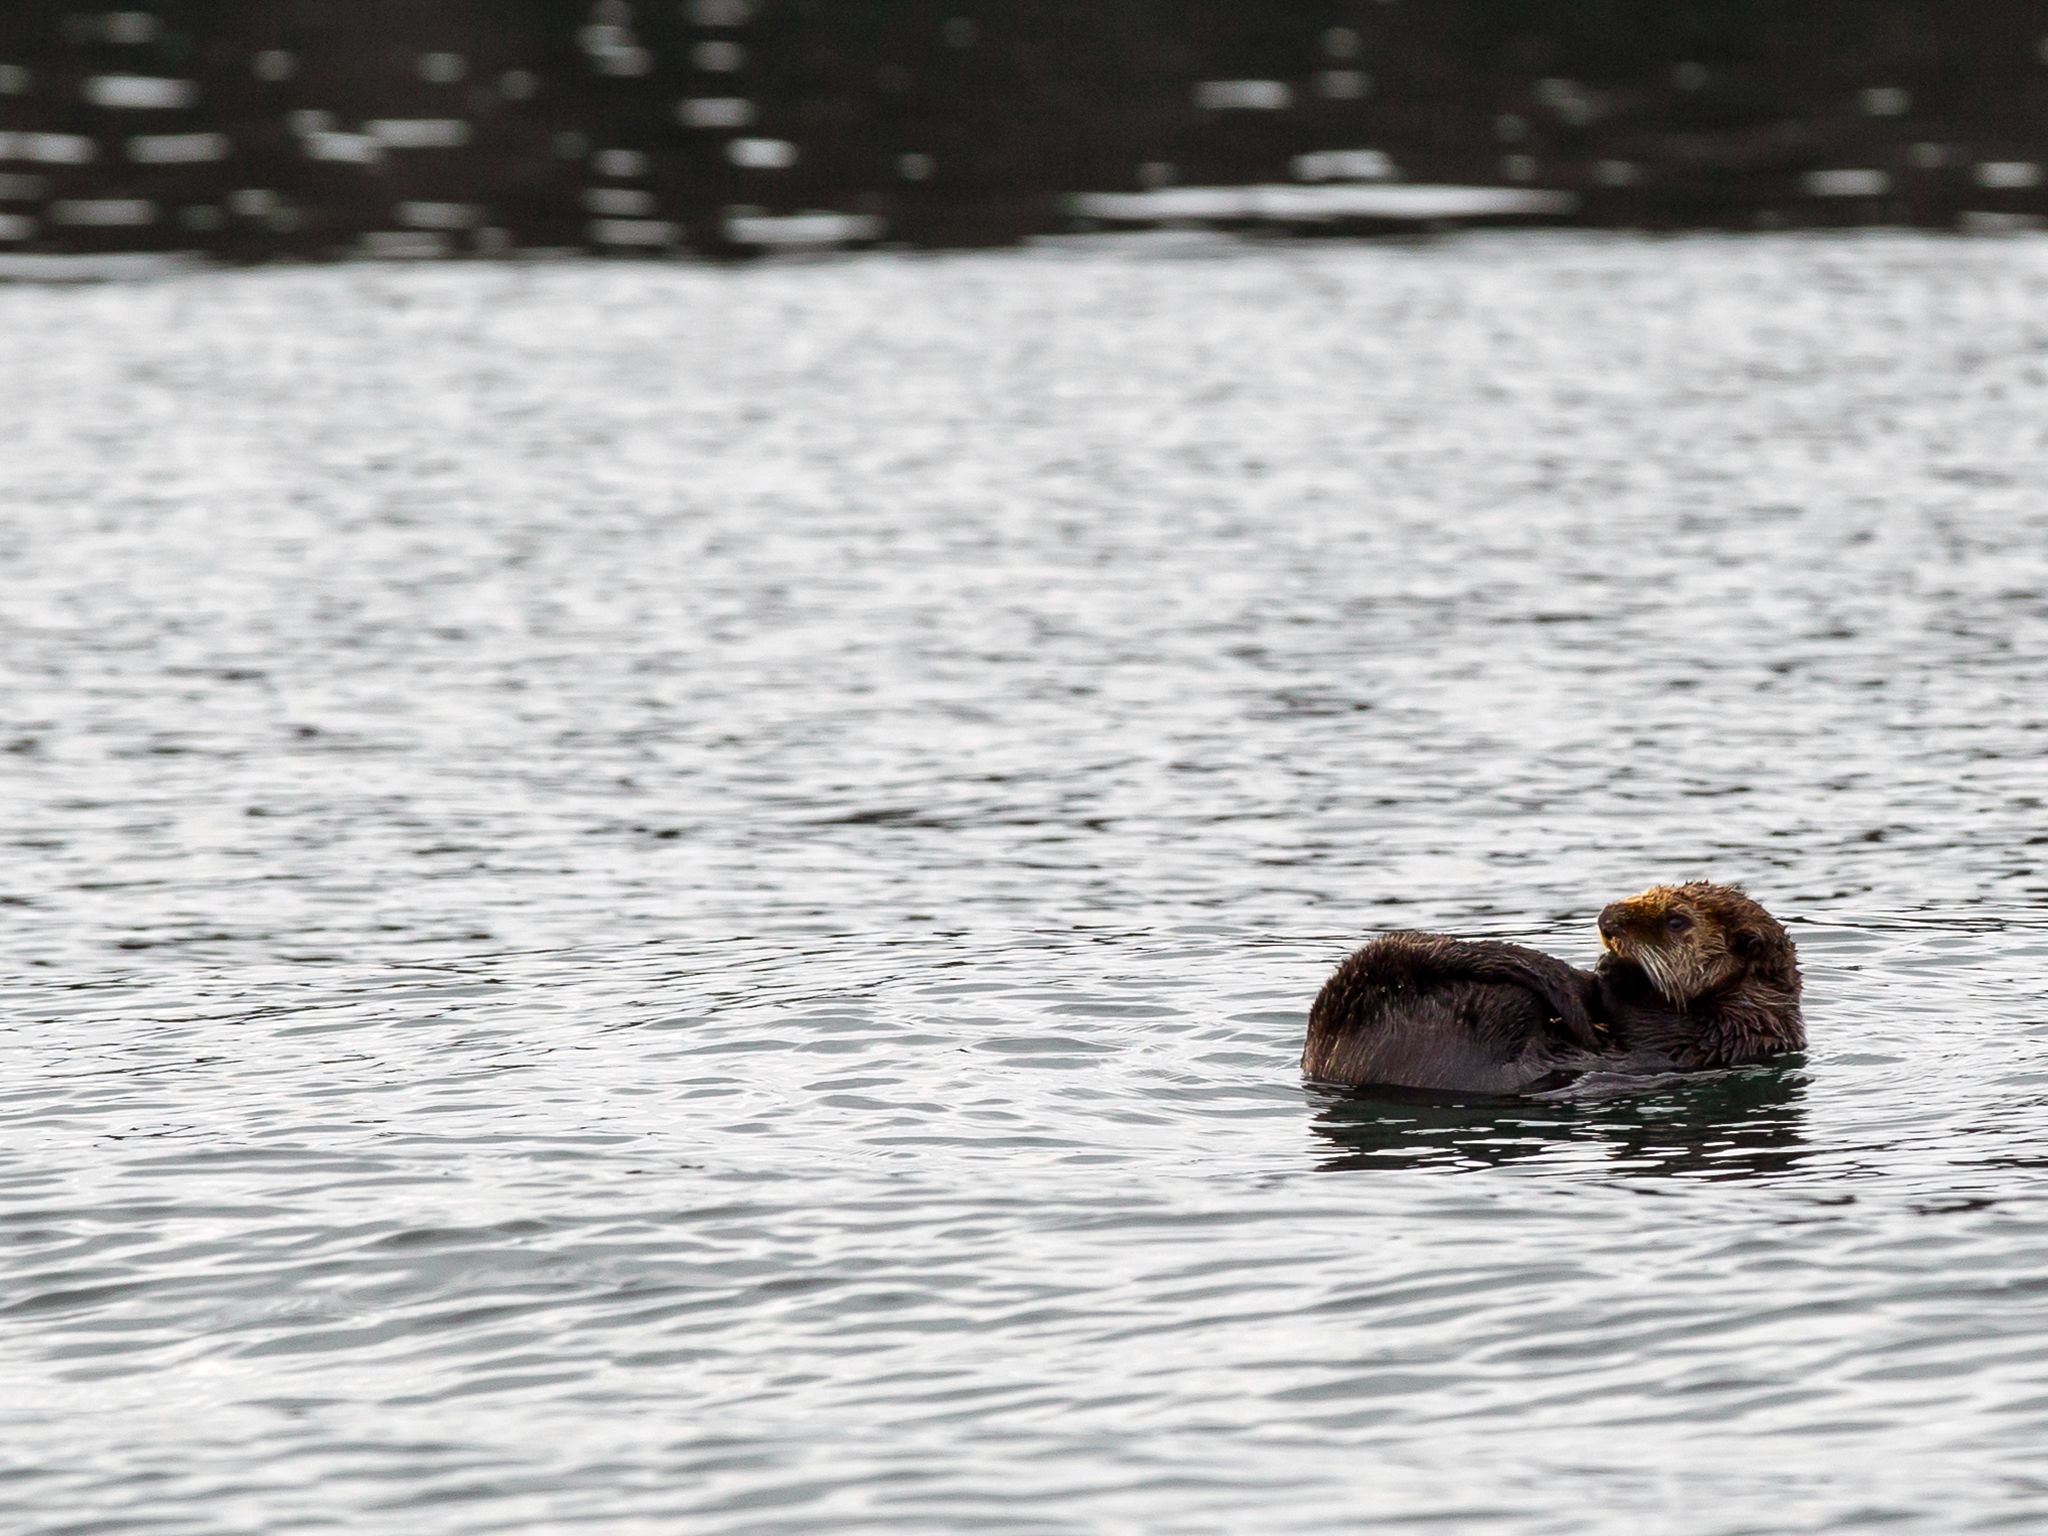 An otter swims on its back near the docks in Port Protection, AK. This image is from Port... [Photo of the day - November 2015]